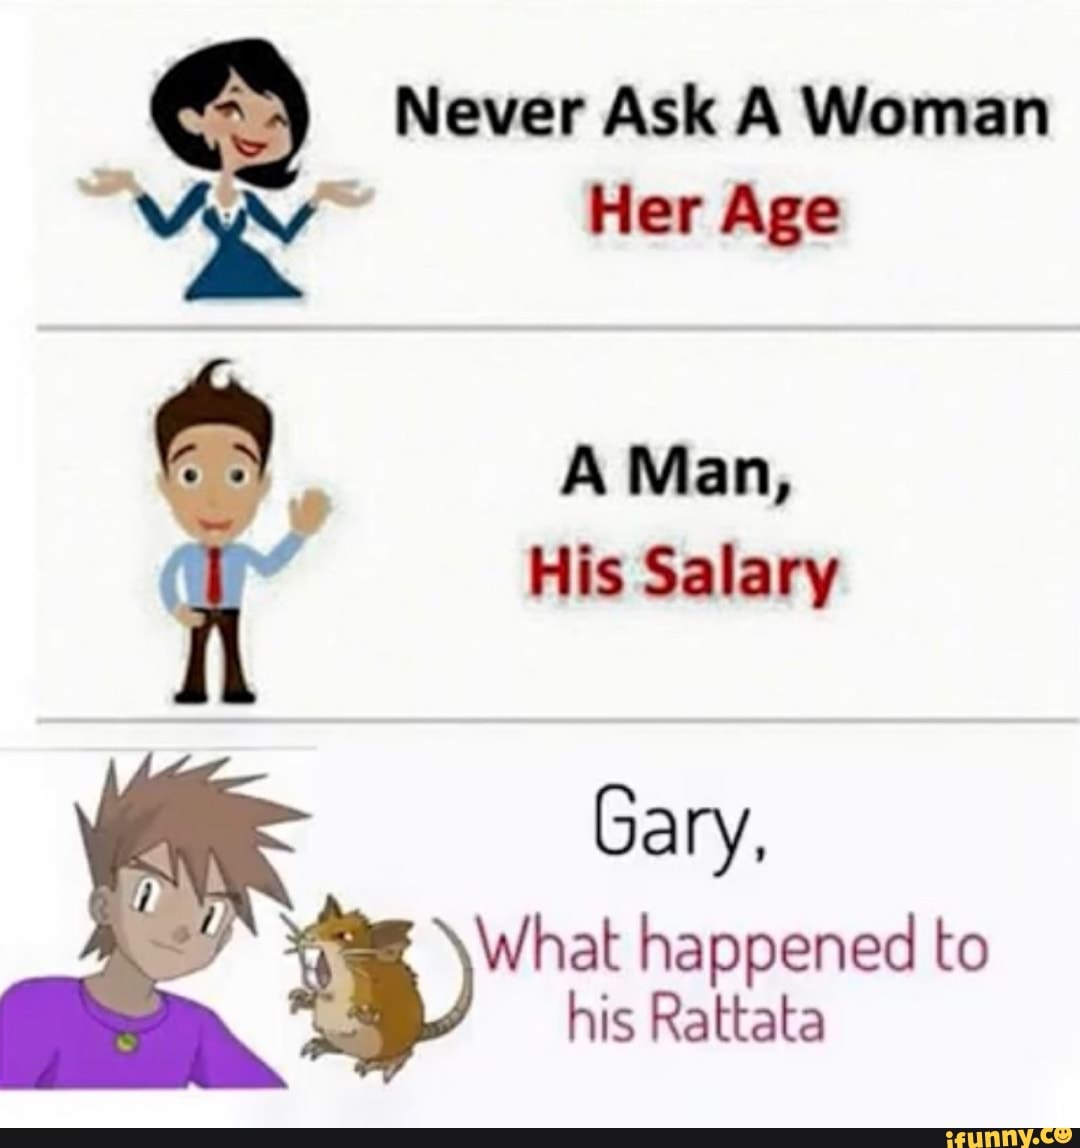 Never Ask A Woman Her Age A Man, His Salary Gary, What happened to his